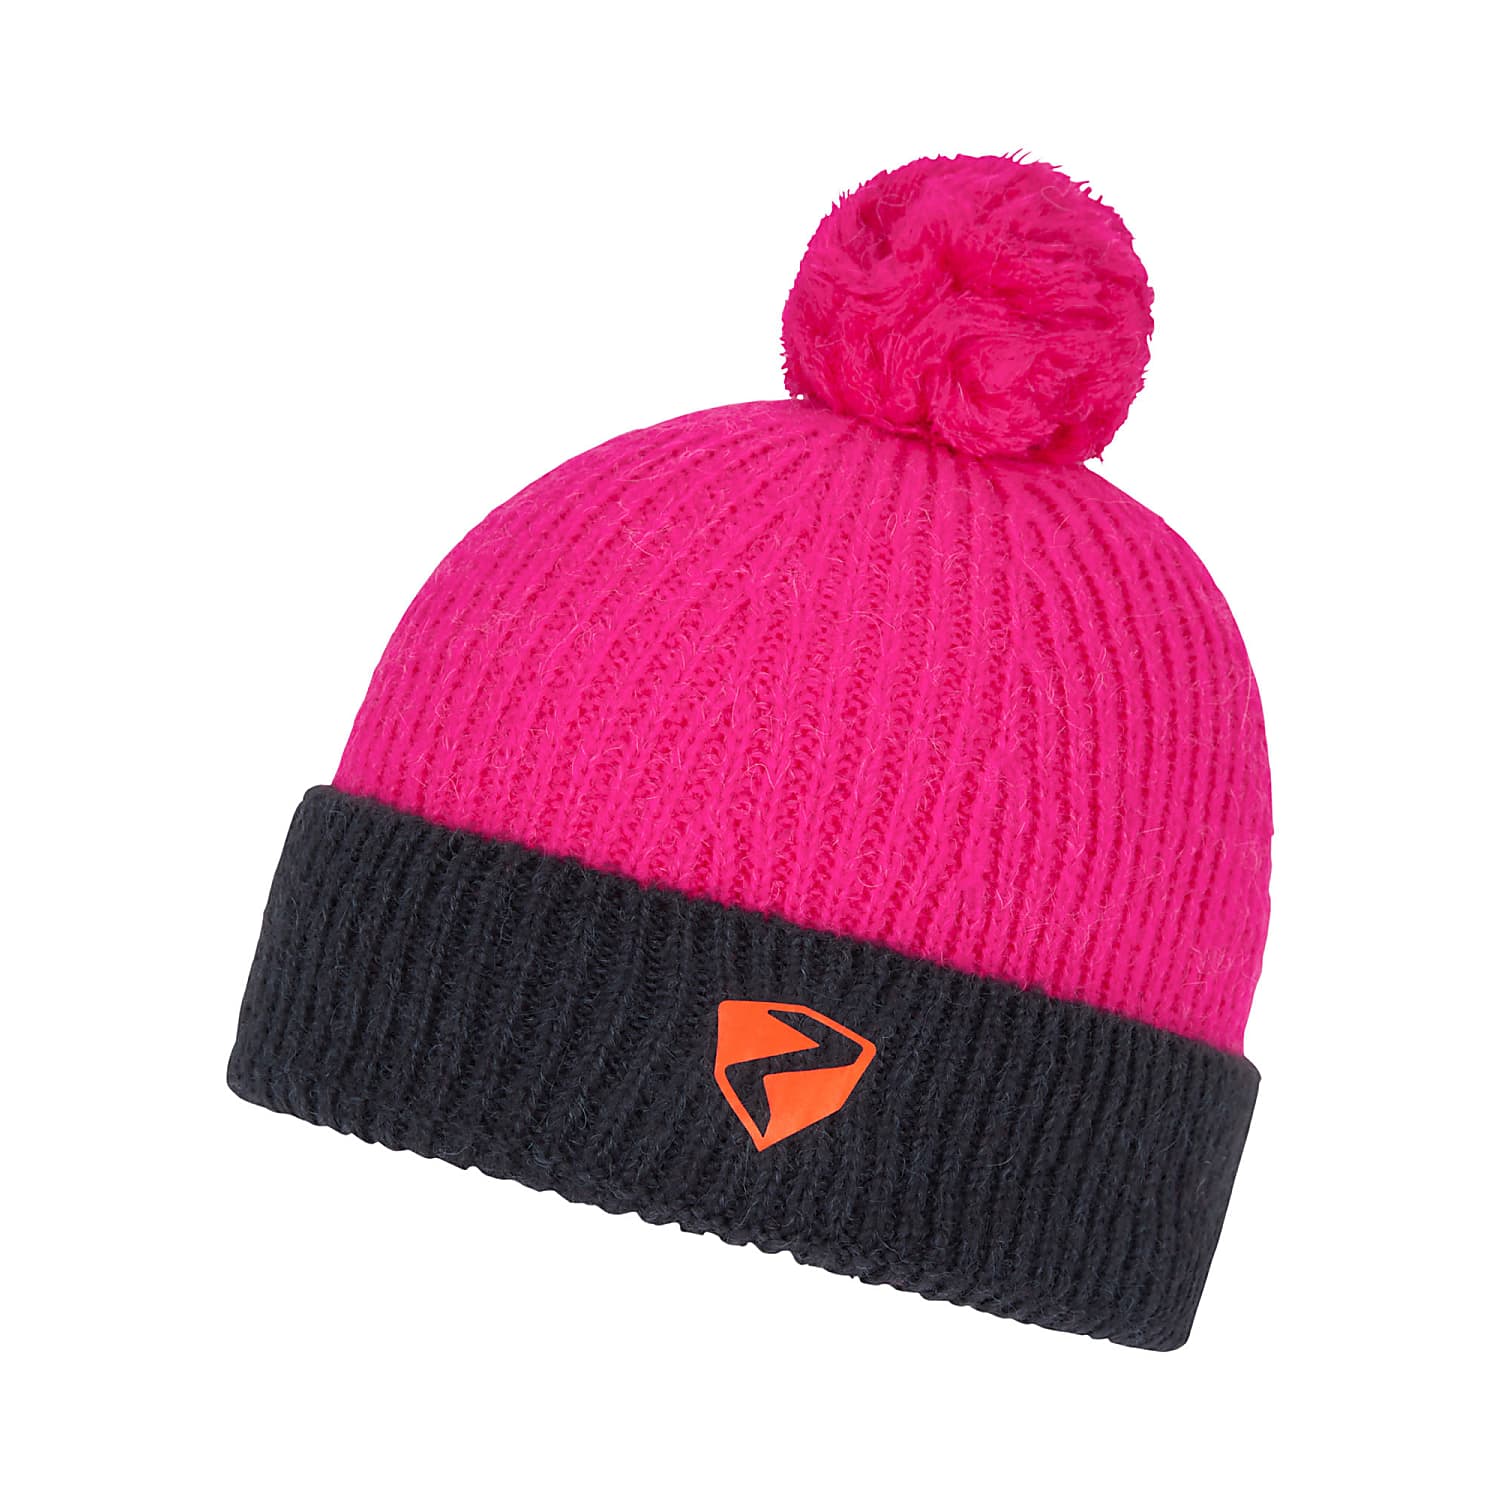 cheap HAT Ziener IKEN MODEL), Fast JUNIOR - Pink shipping Bright and (PREVIOUS